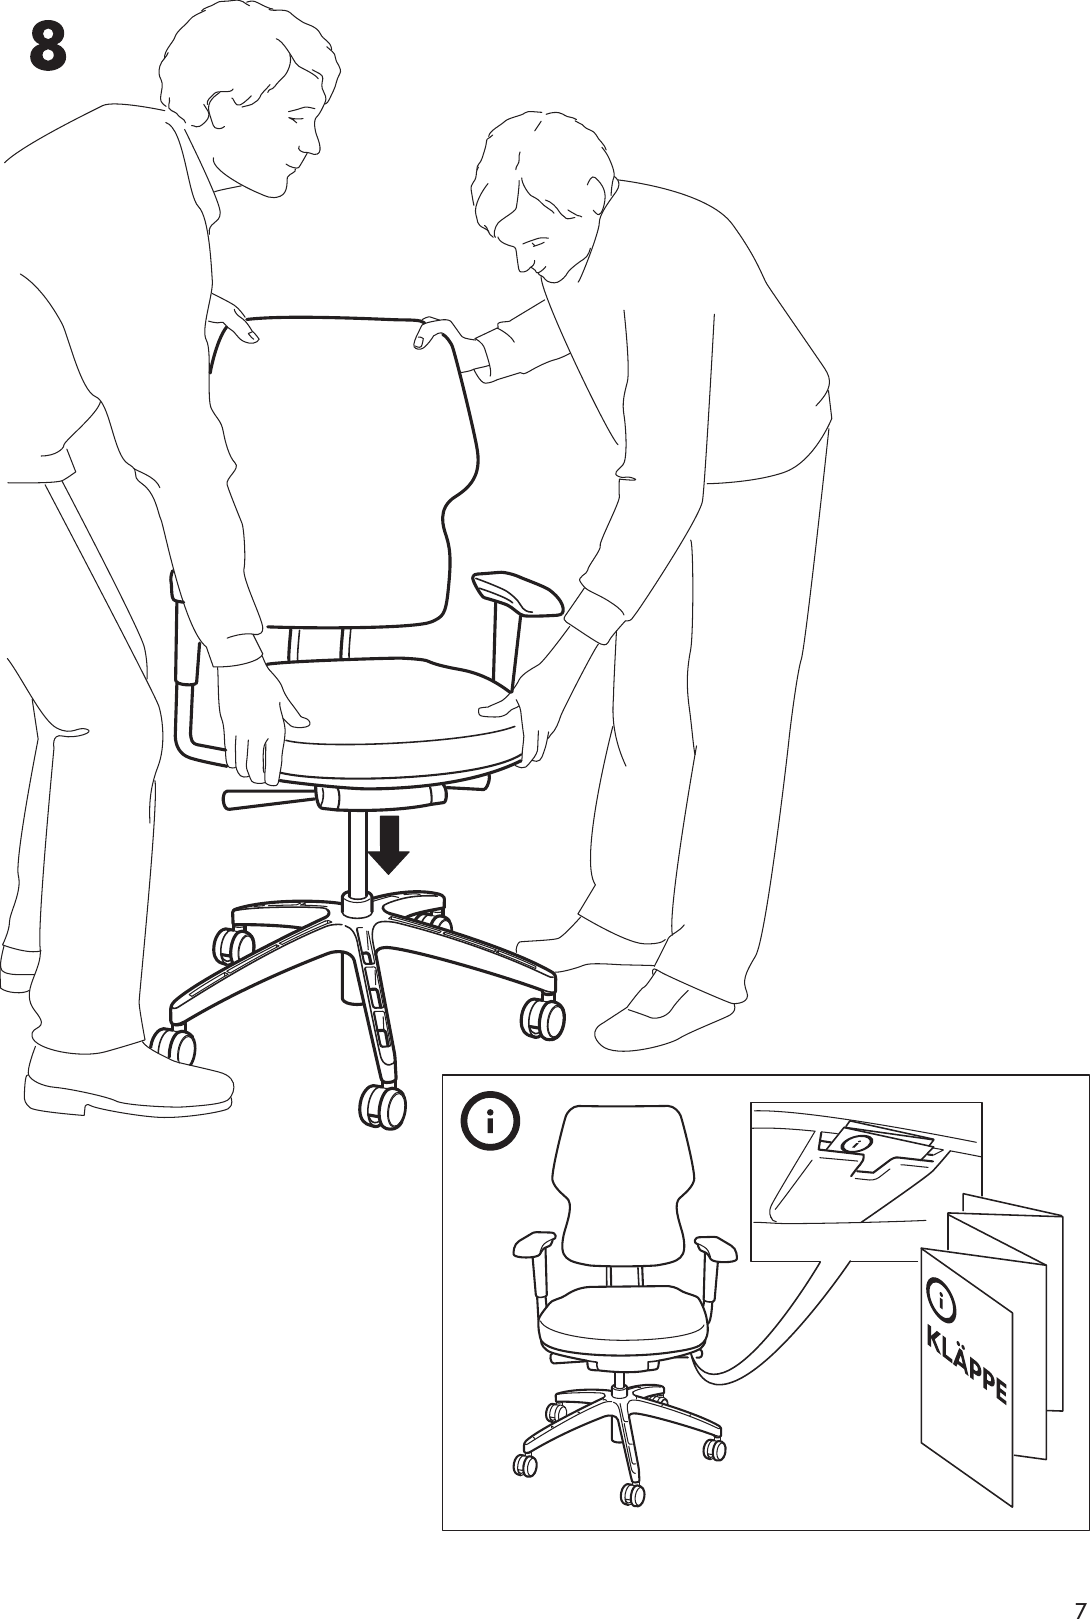 Page 7 of 12 - Ikea Ikea-Klappe-Swivel-Chair-Assembly-Instruction